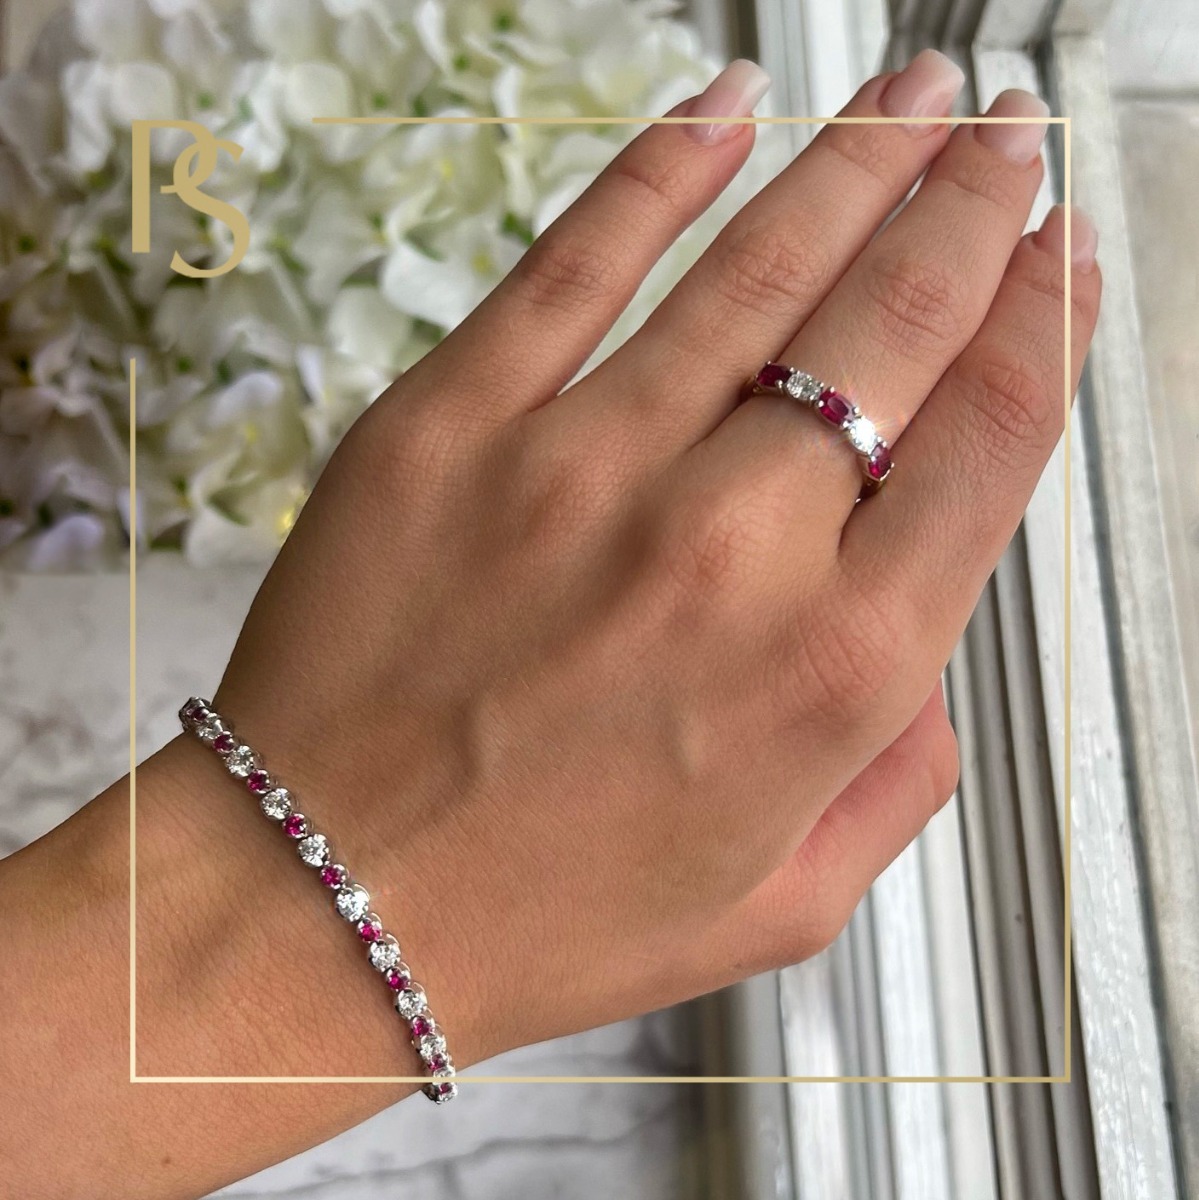 Ruby ring and bracelet worn on a hand